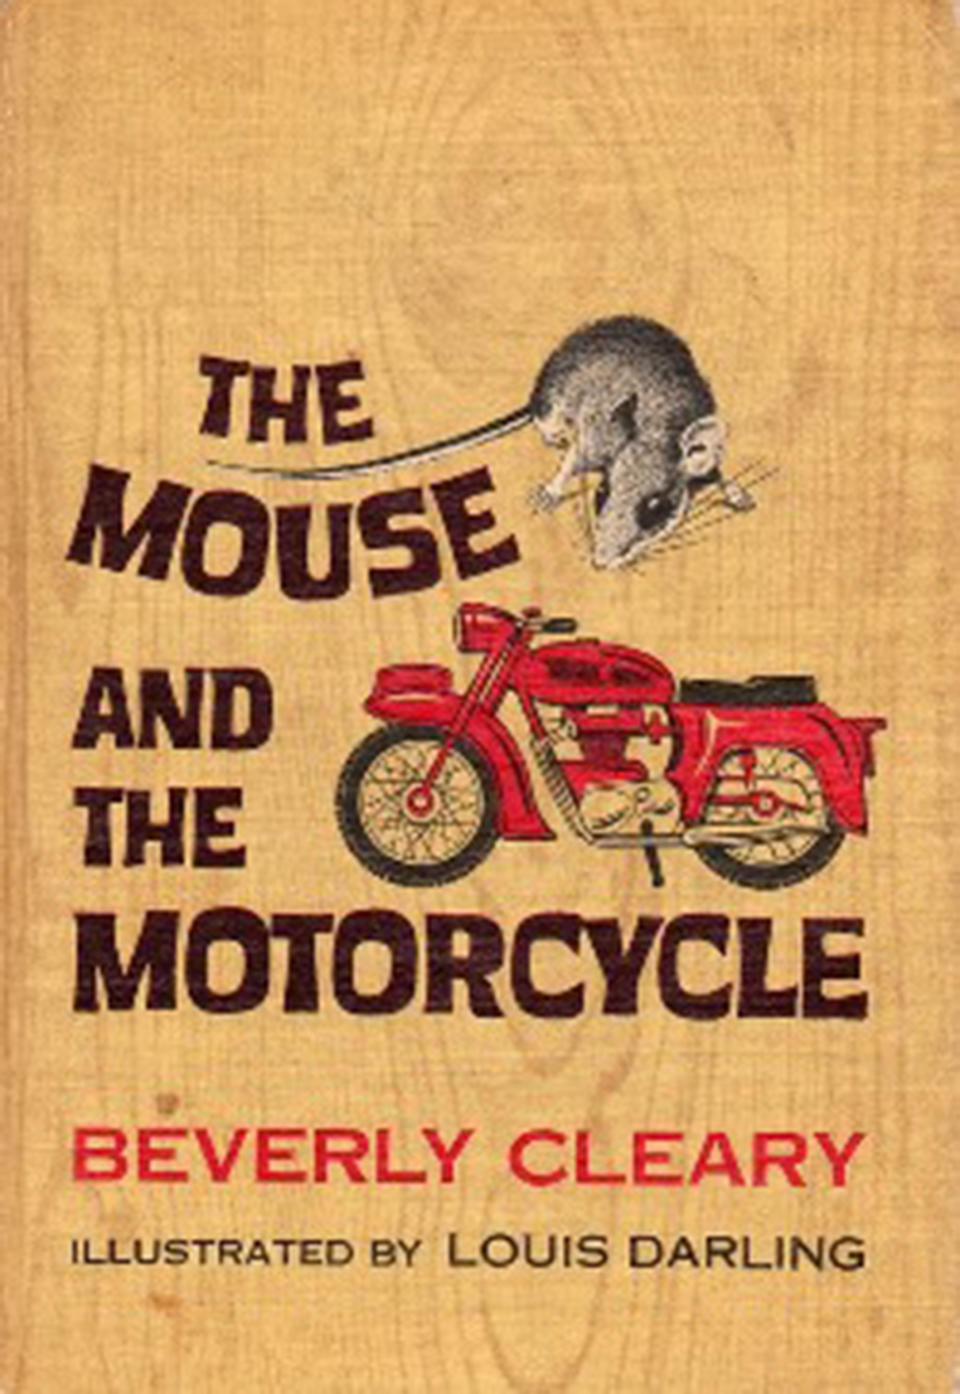 IMAGE: The Mouse and the Motorcycle (William Morrow Publisher)